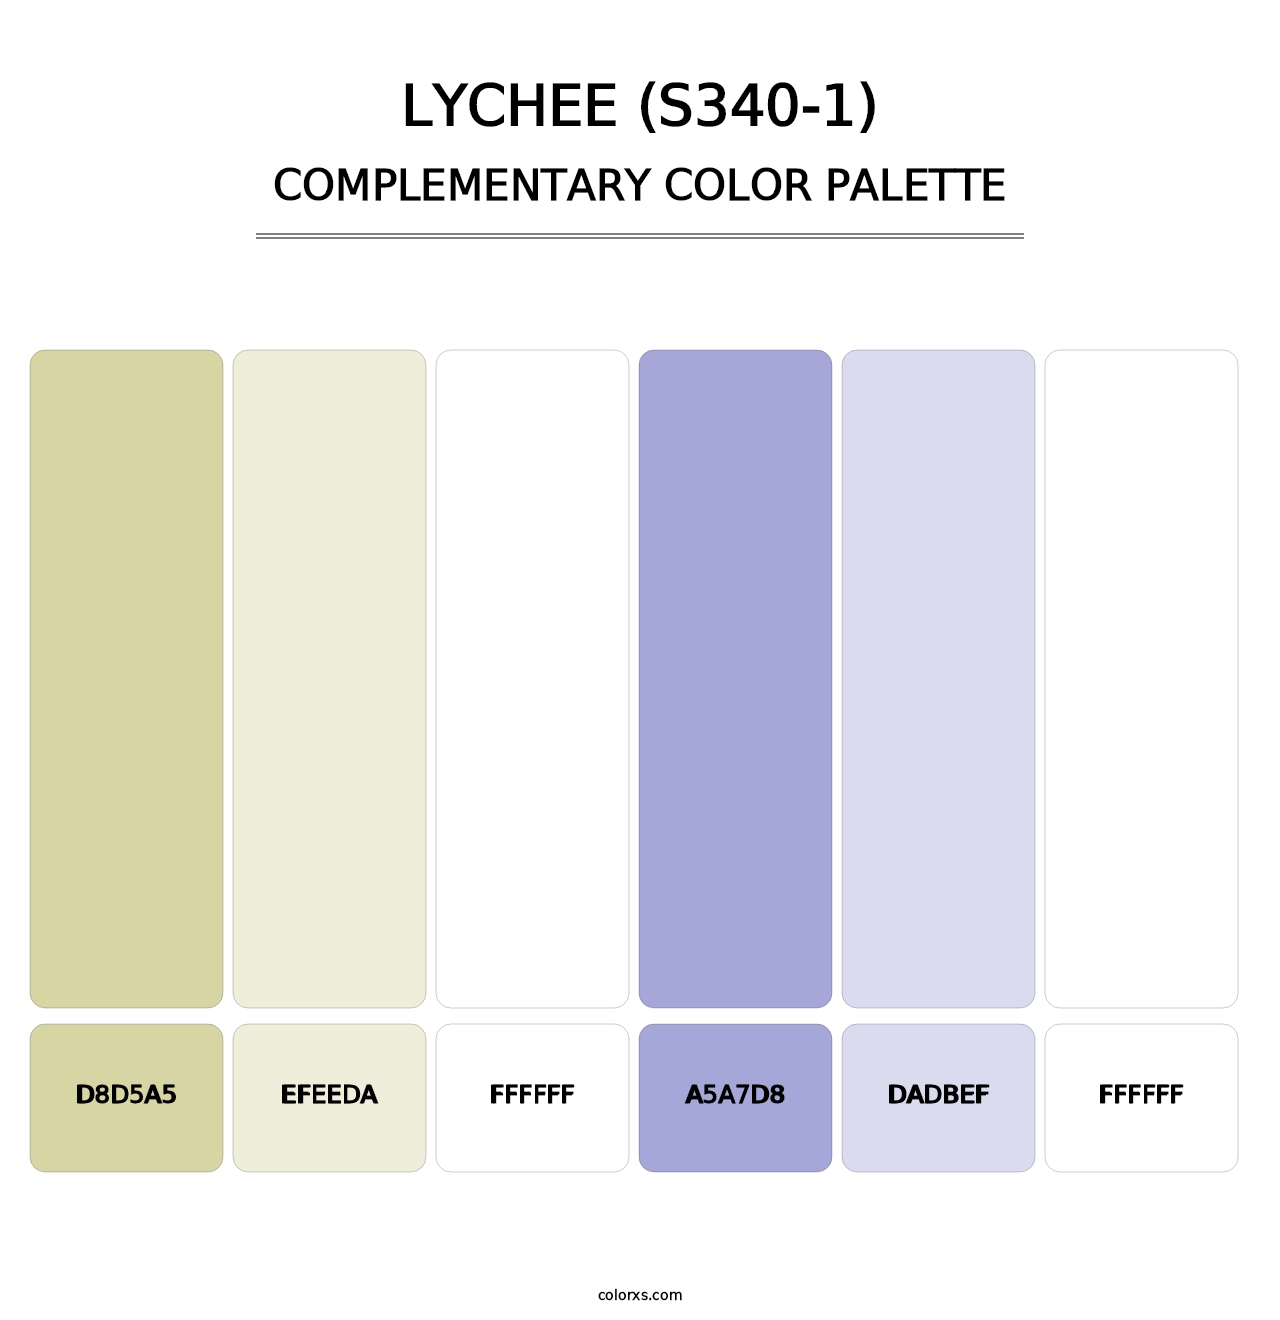 Lychee (S340-1) - Complementary Color Palette